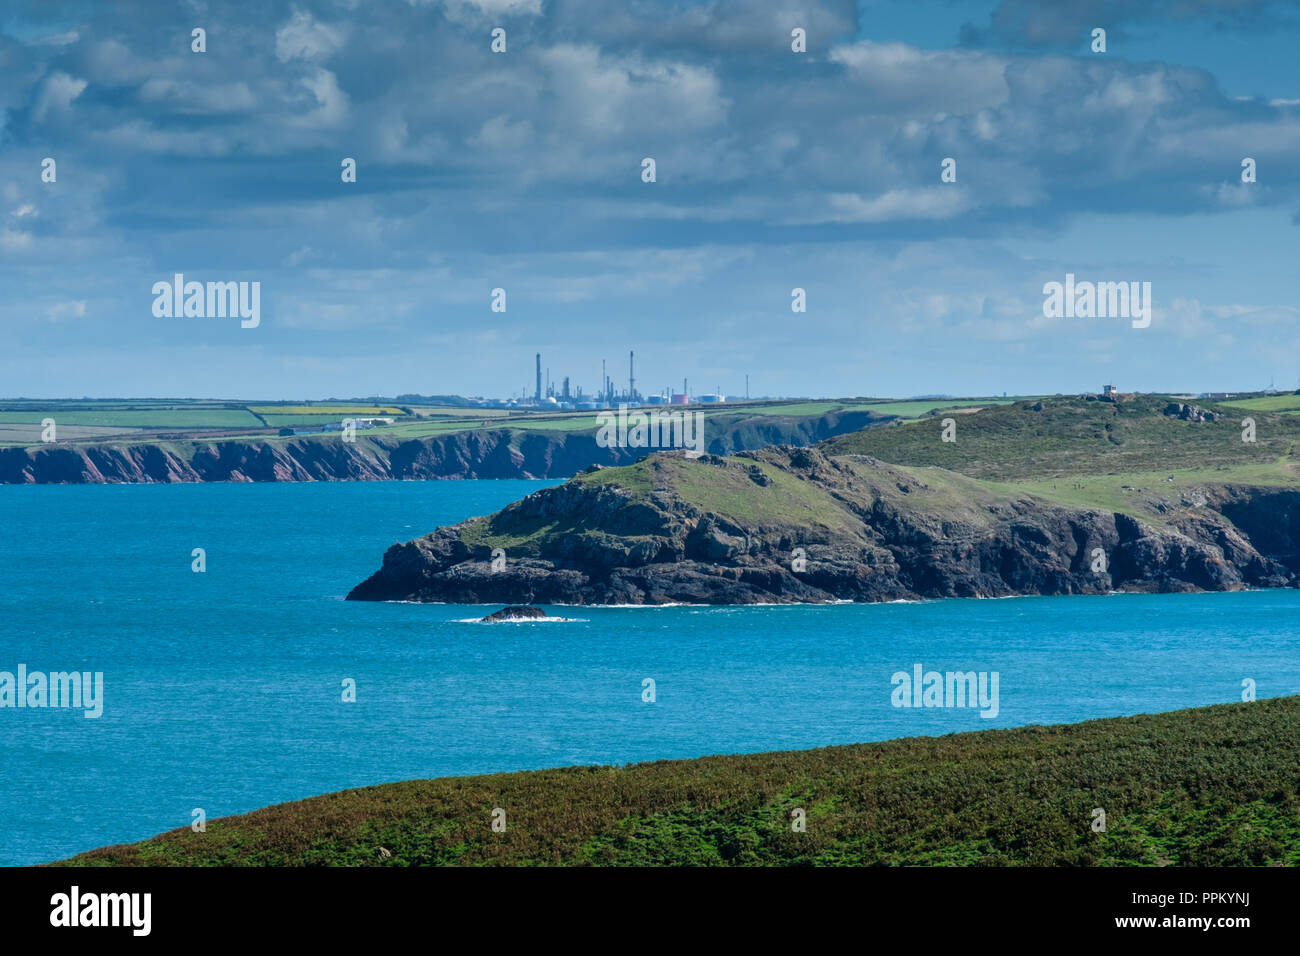 Oil refinereies at Milford Haven seen from Skomer Island, Pembrokeshire, Wales Stock Photo